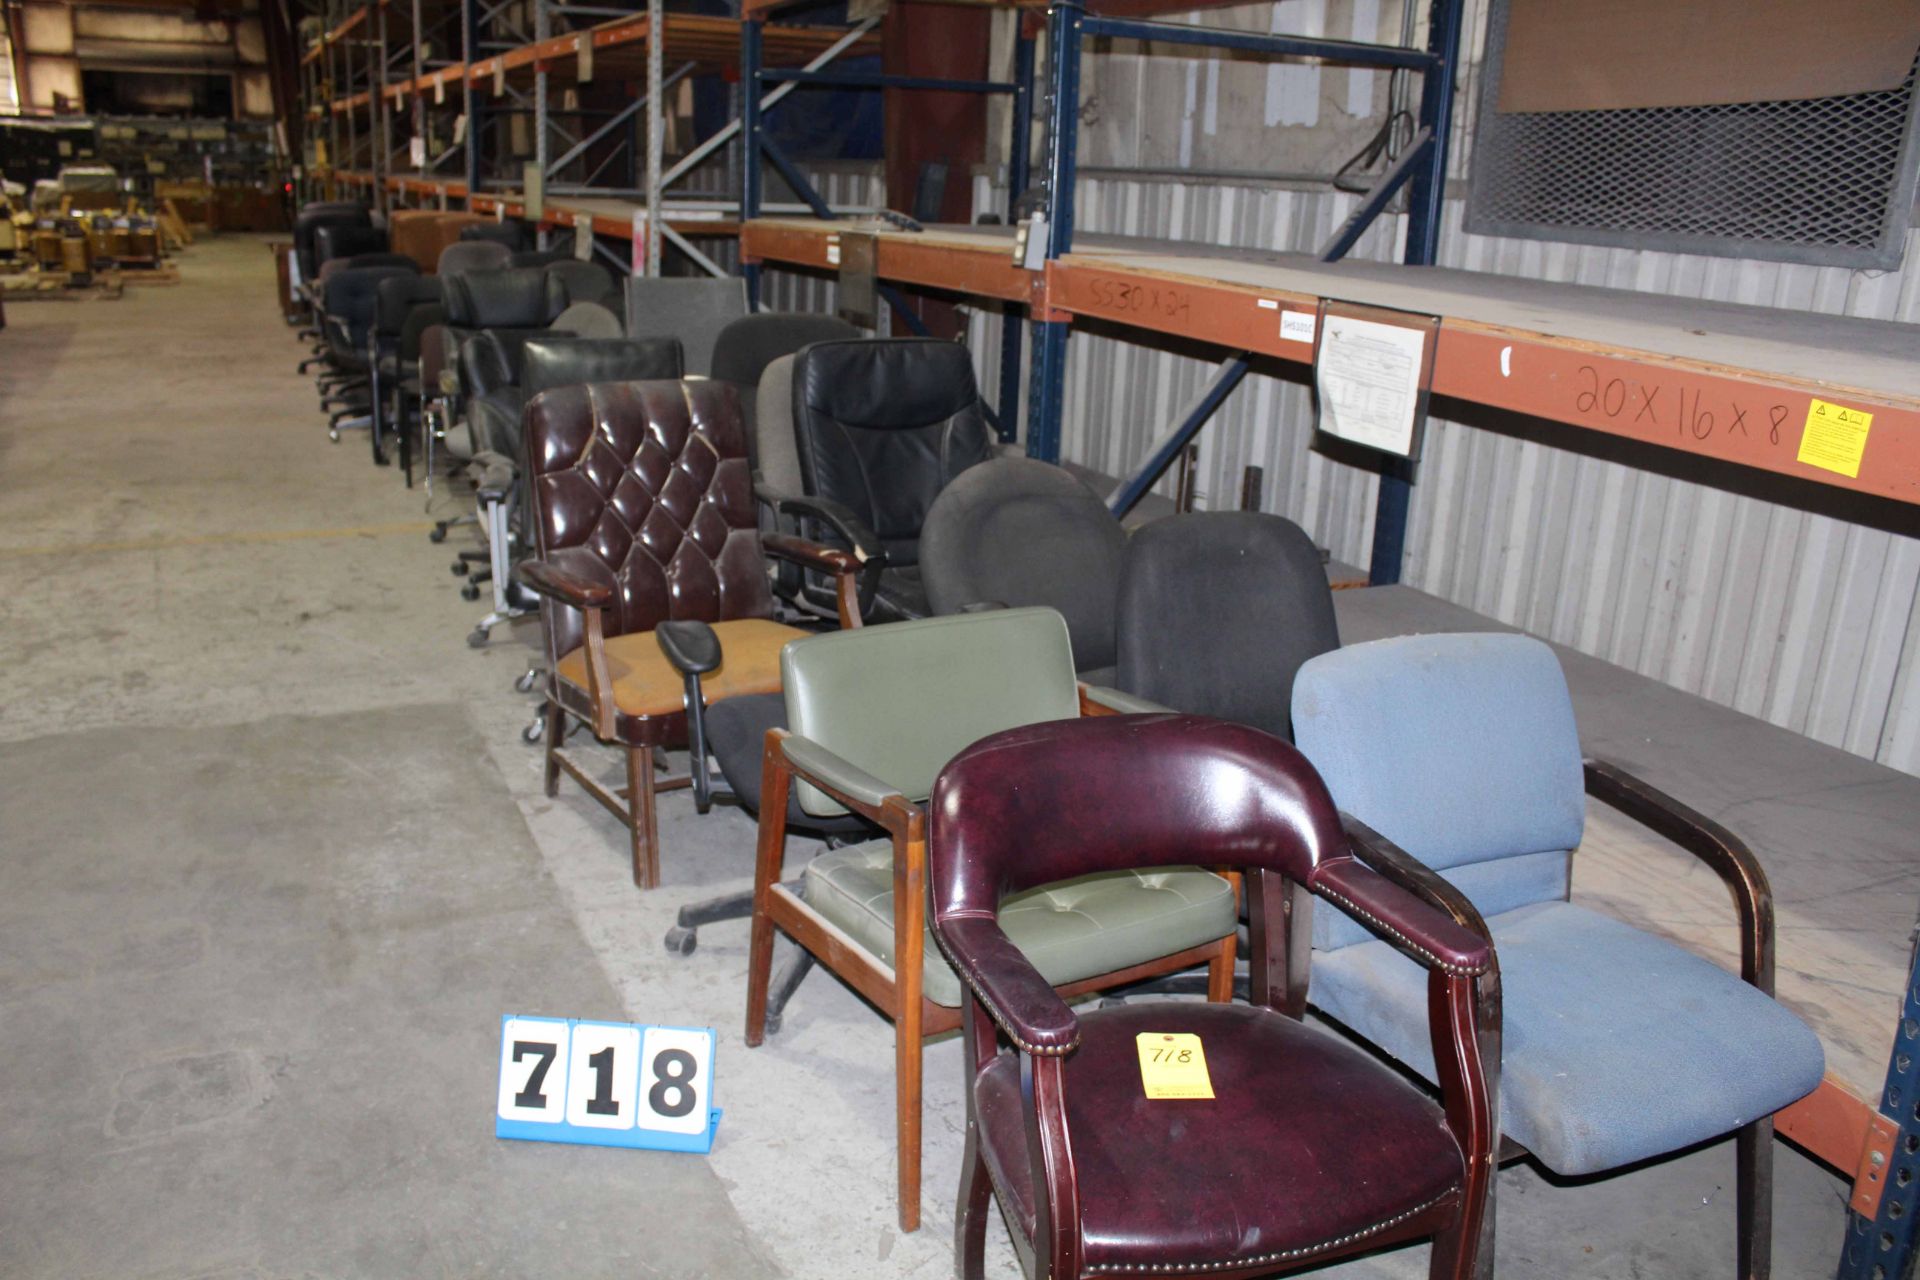 LOT OF CHAIRS (in two rows)